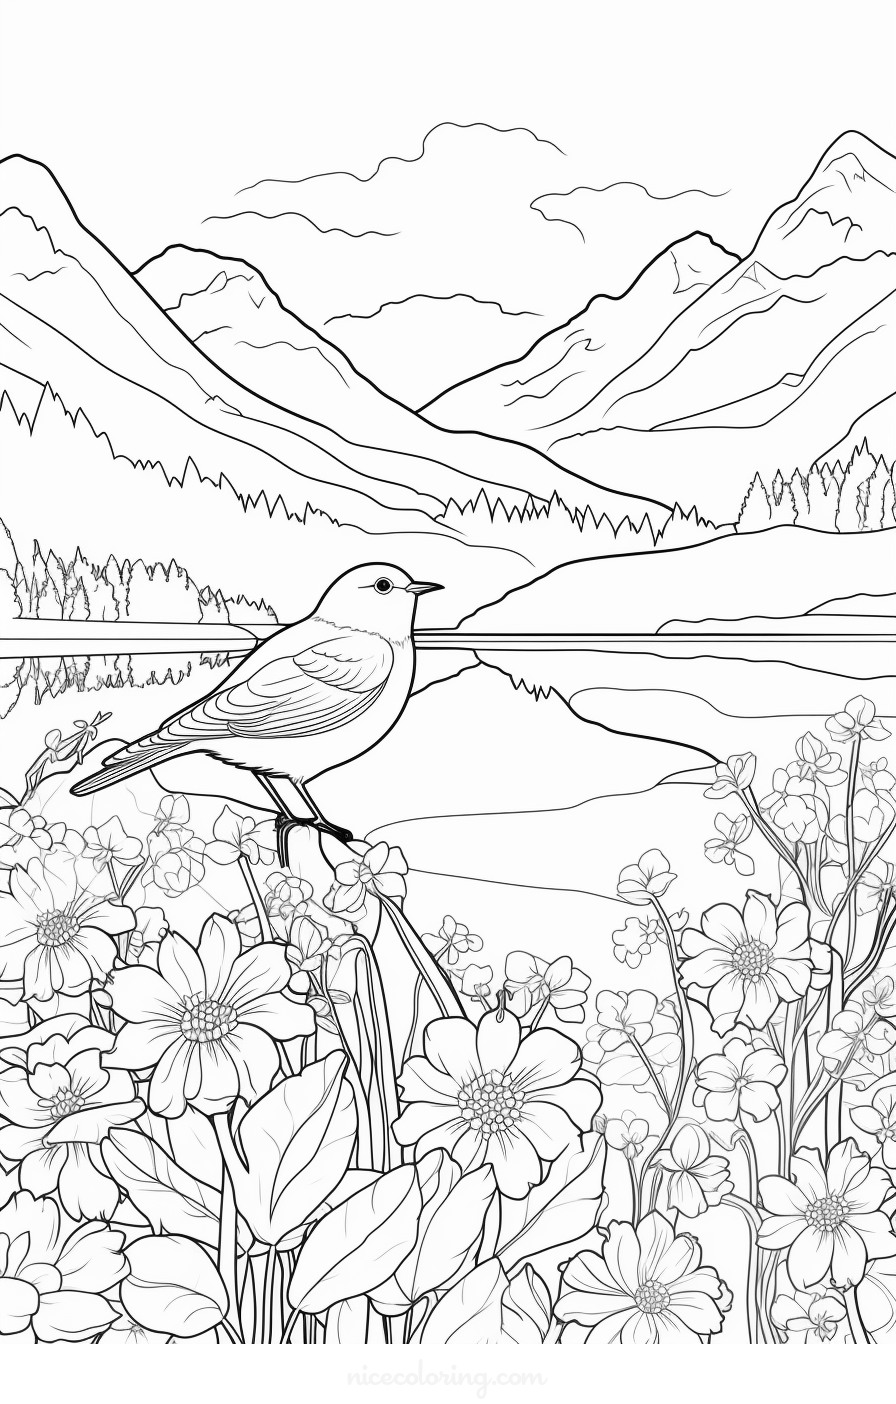 A scene of various birds in a forest setting for coloring